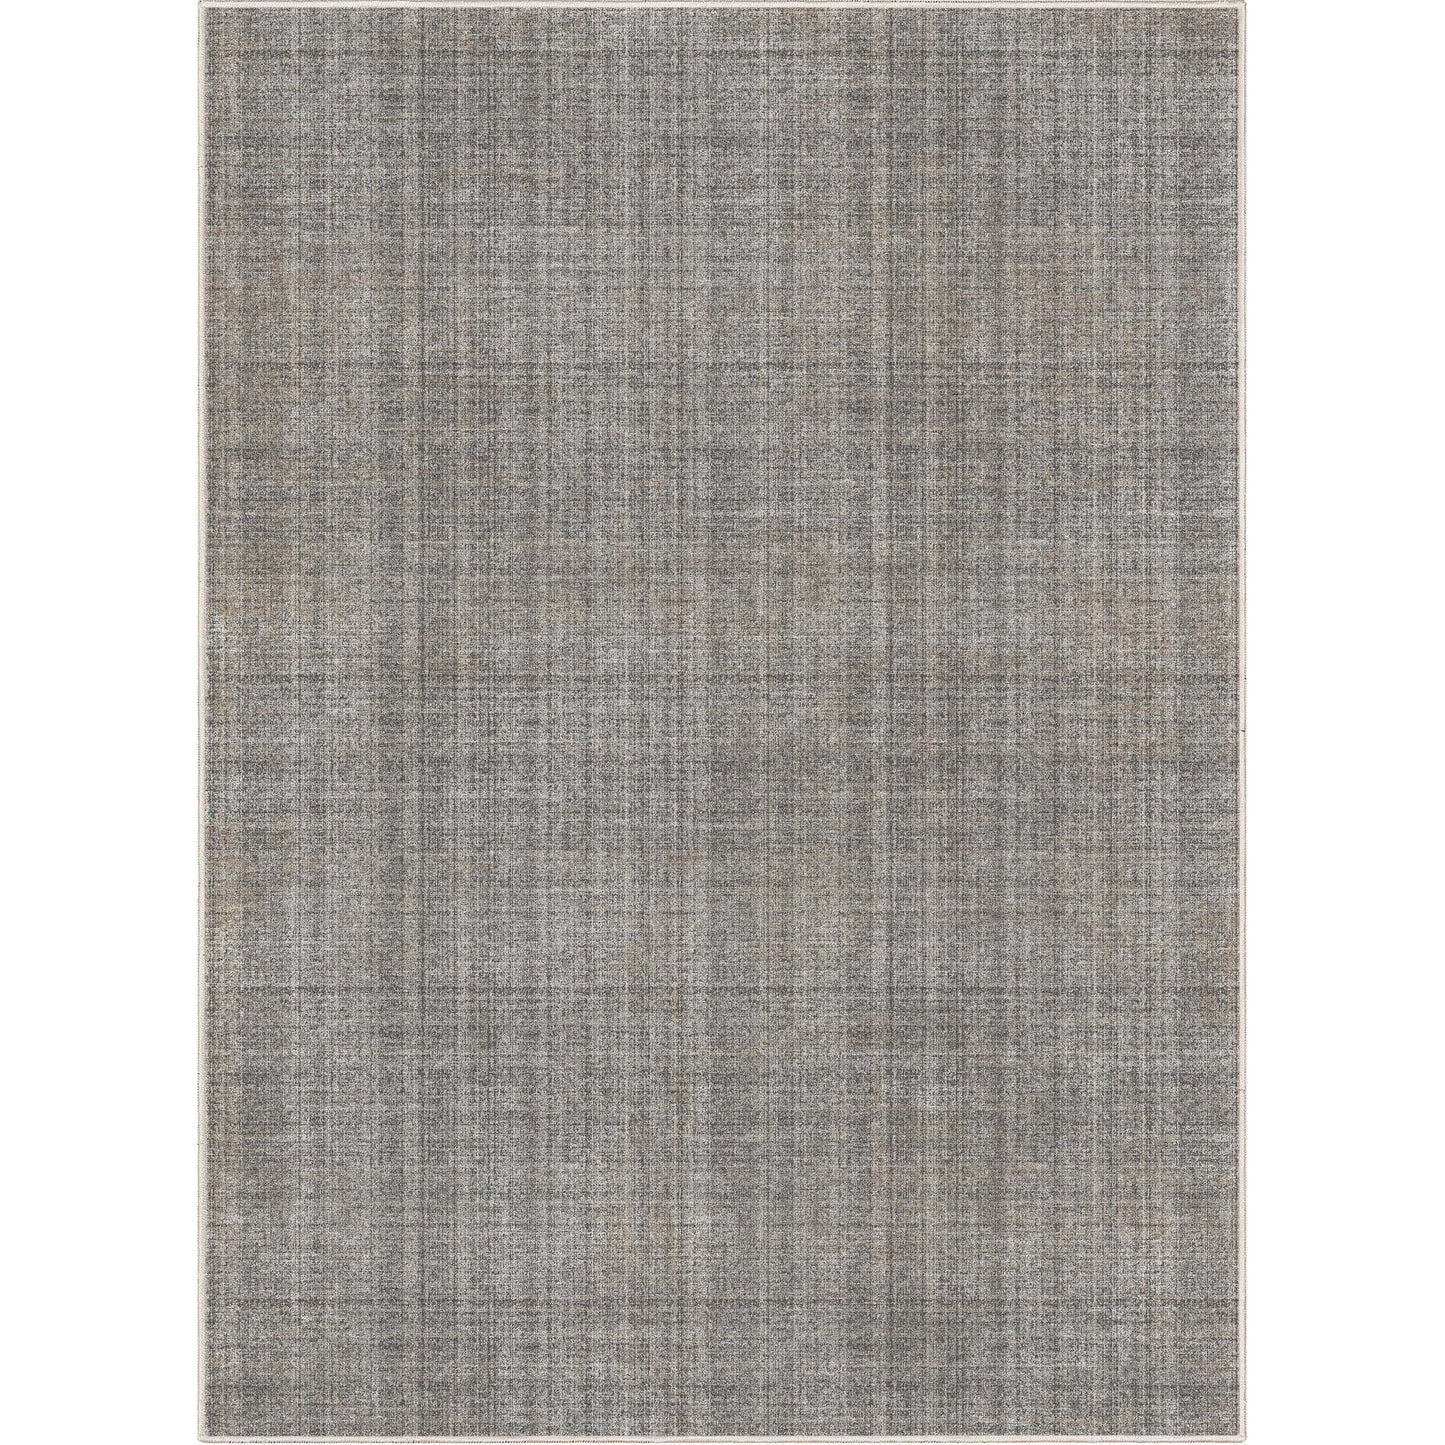 Abstract Burst Beige Anthracite Rug W-AB-23A